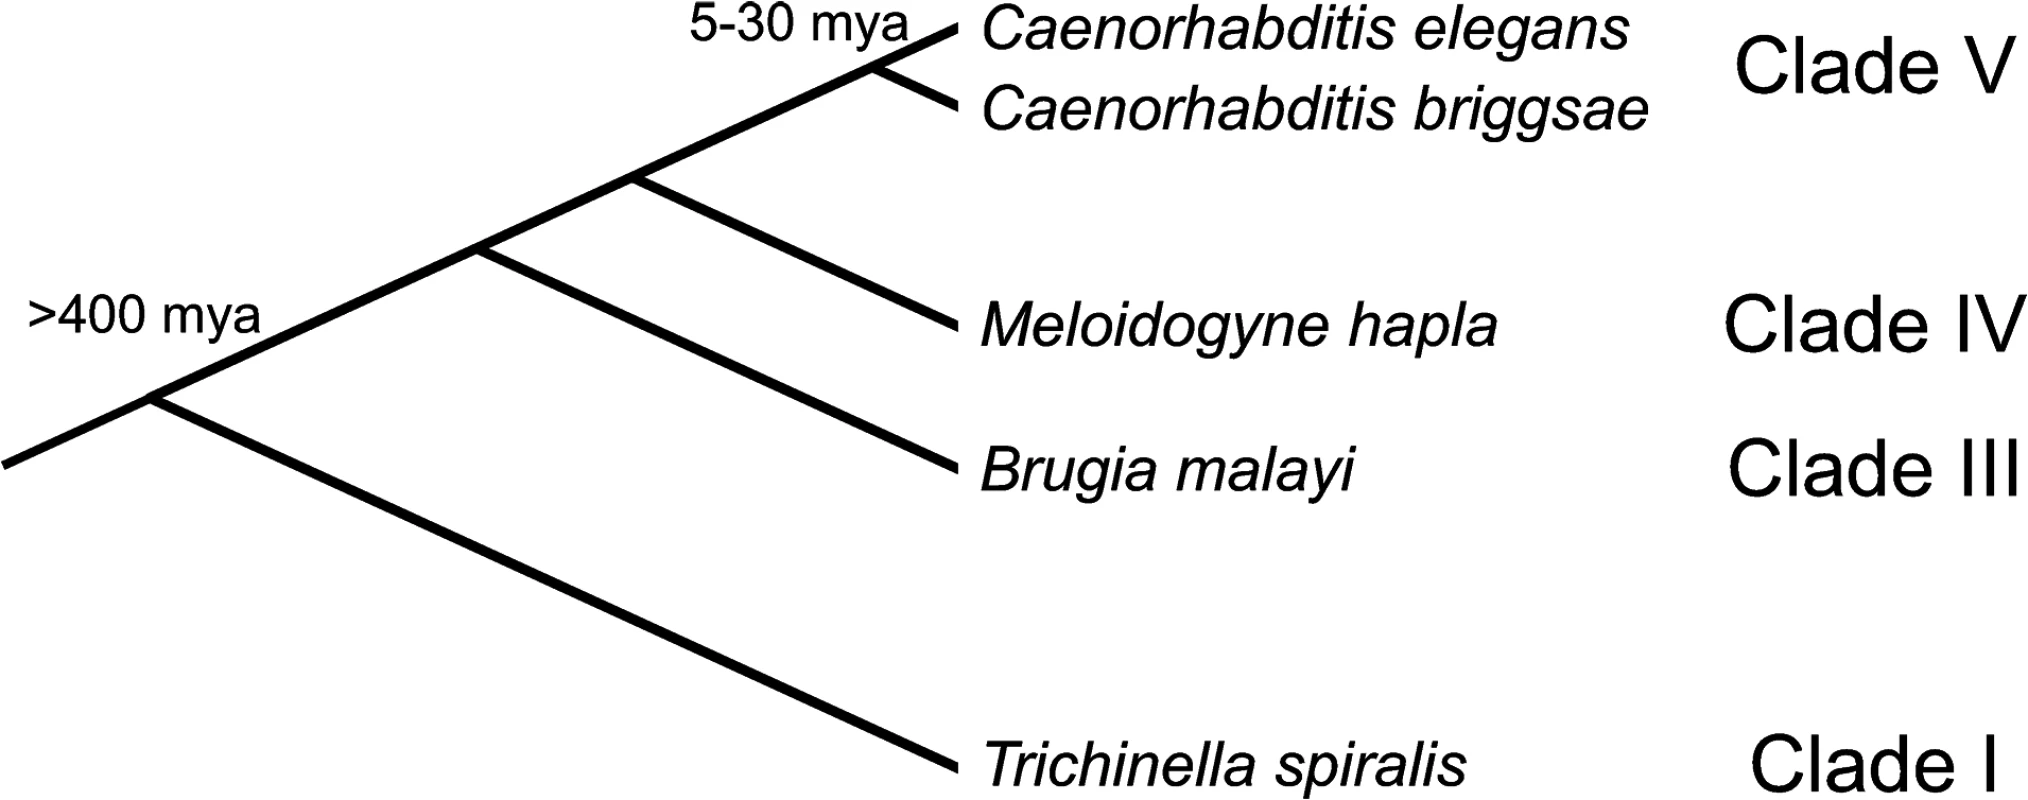 Phylogenetic relationships between the species used in this study.